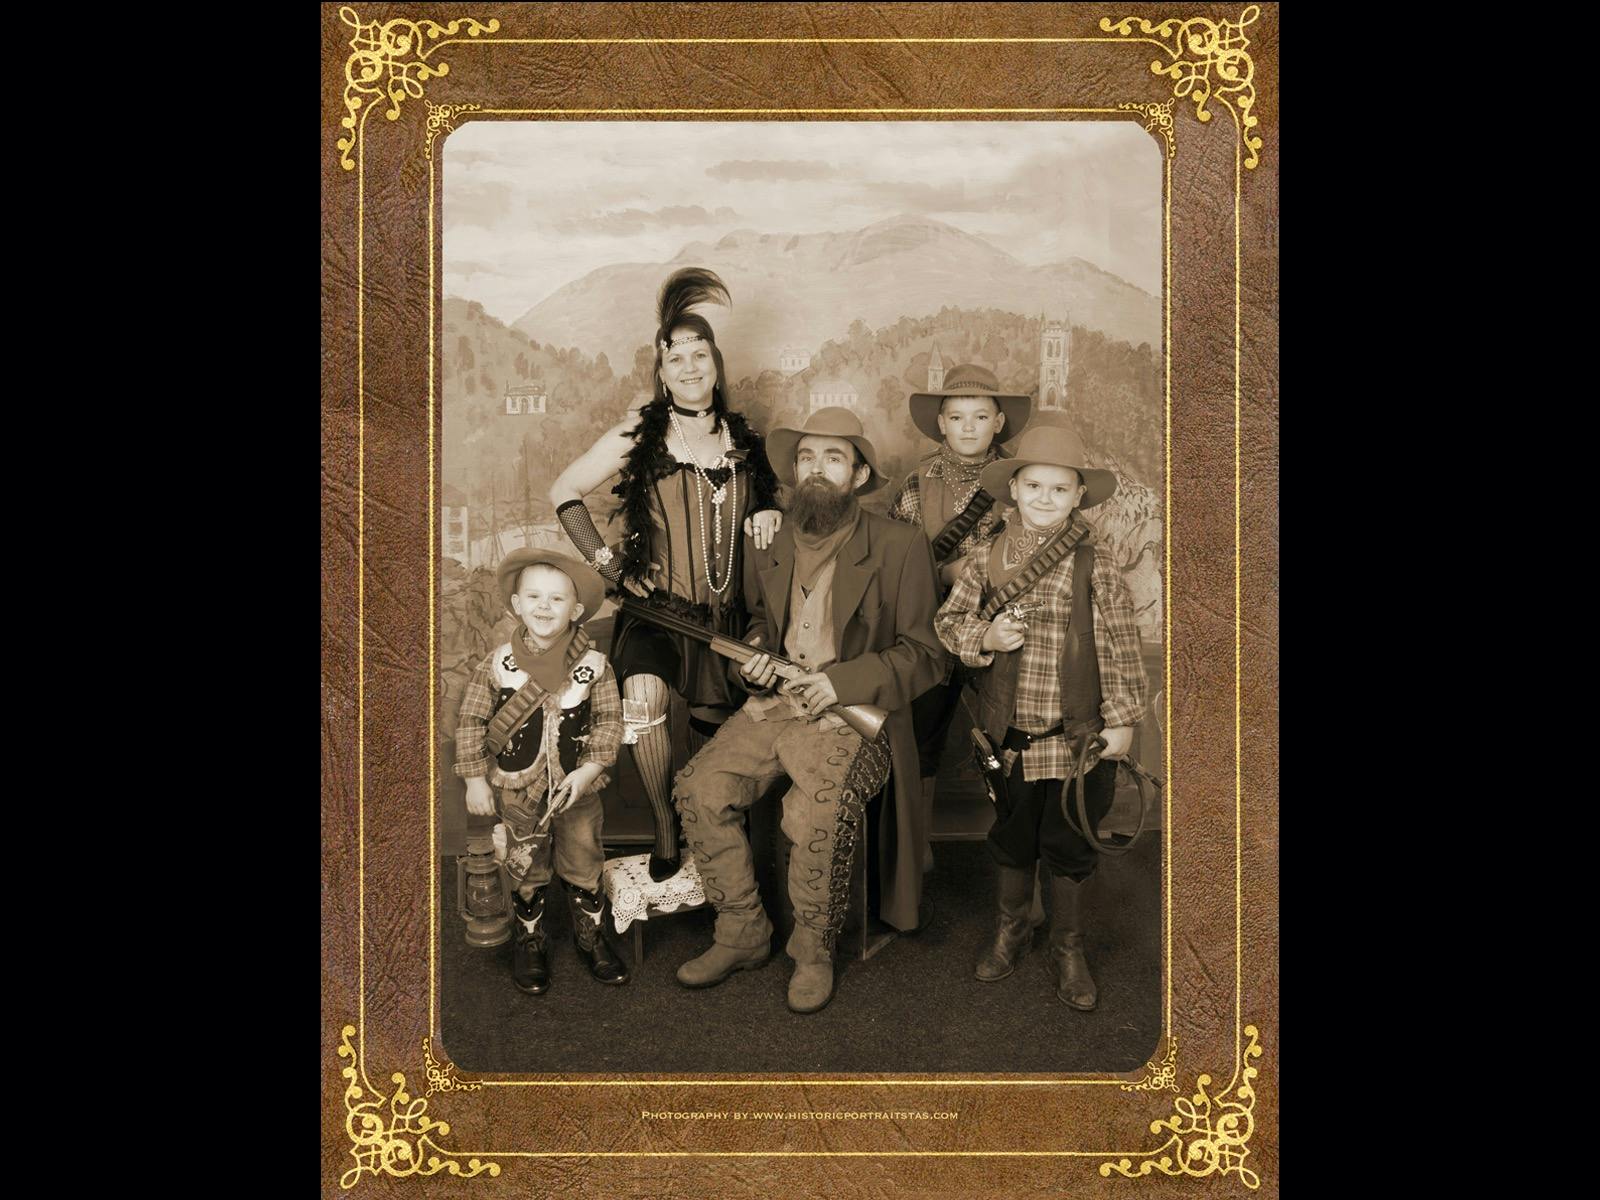 Dress in western costumes to create an Olde Time Portrait